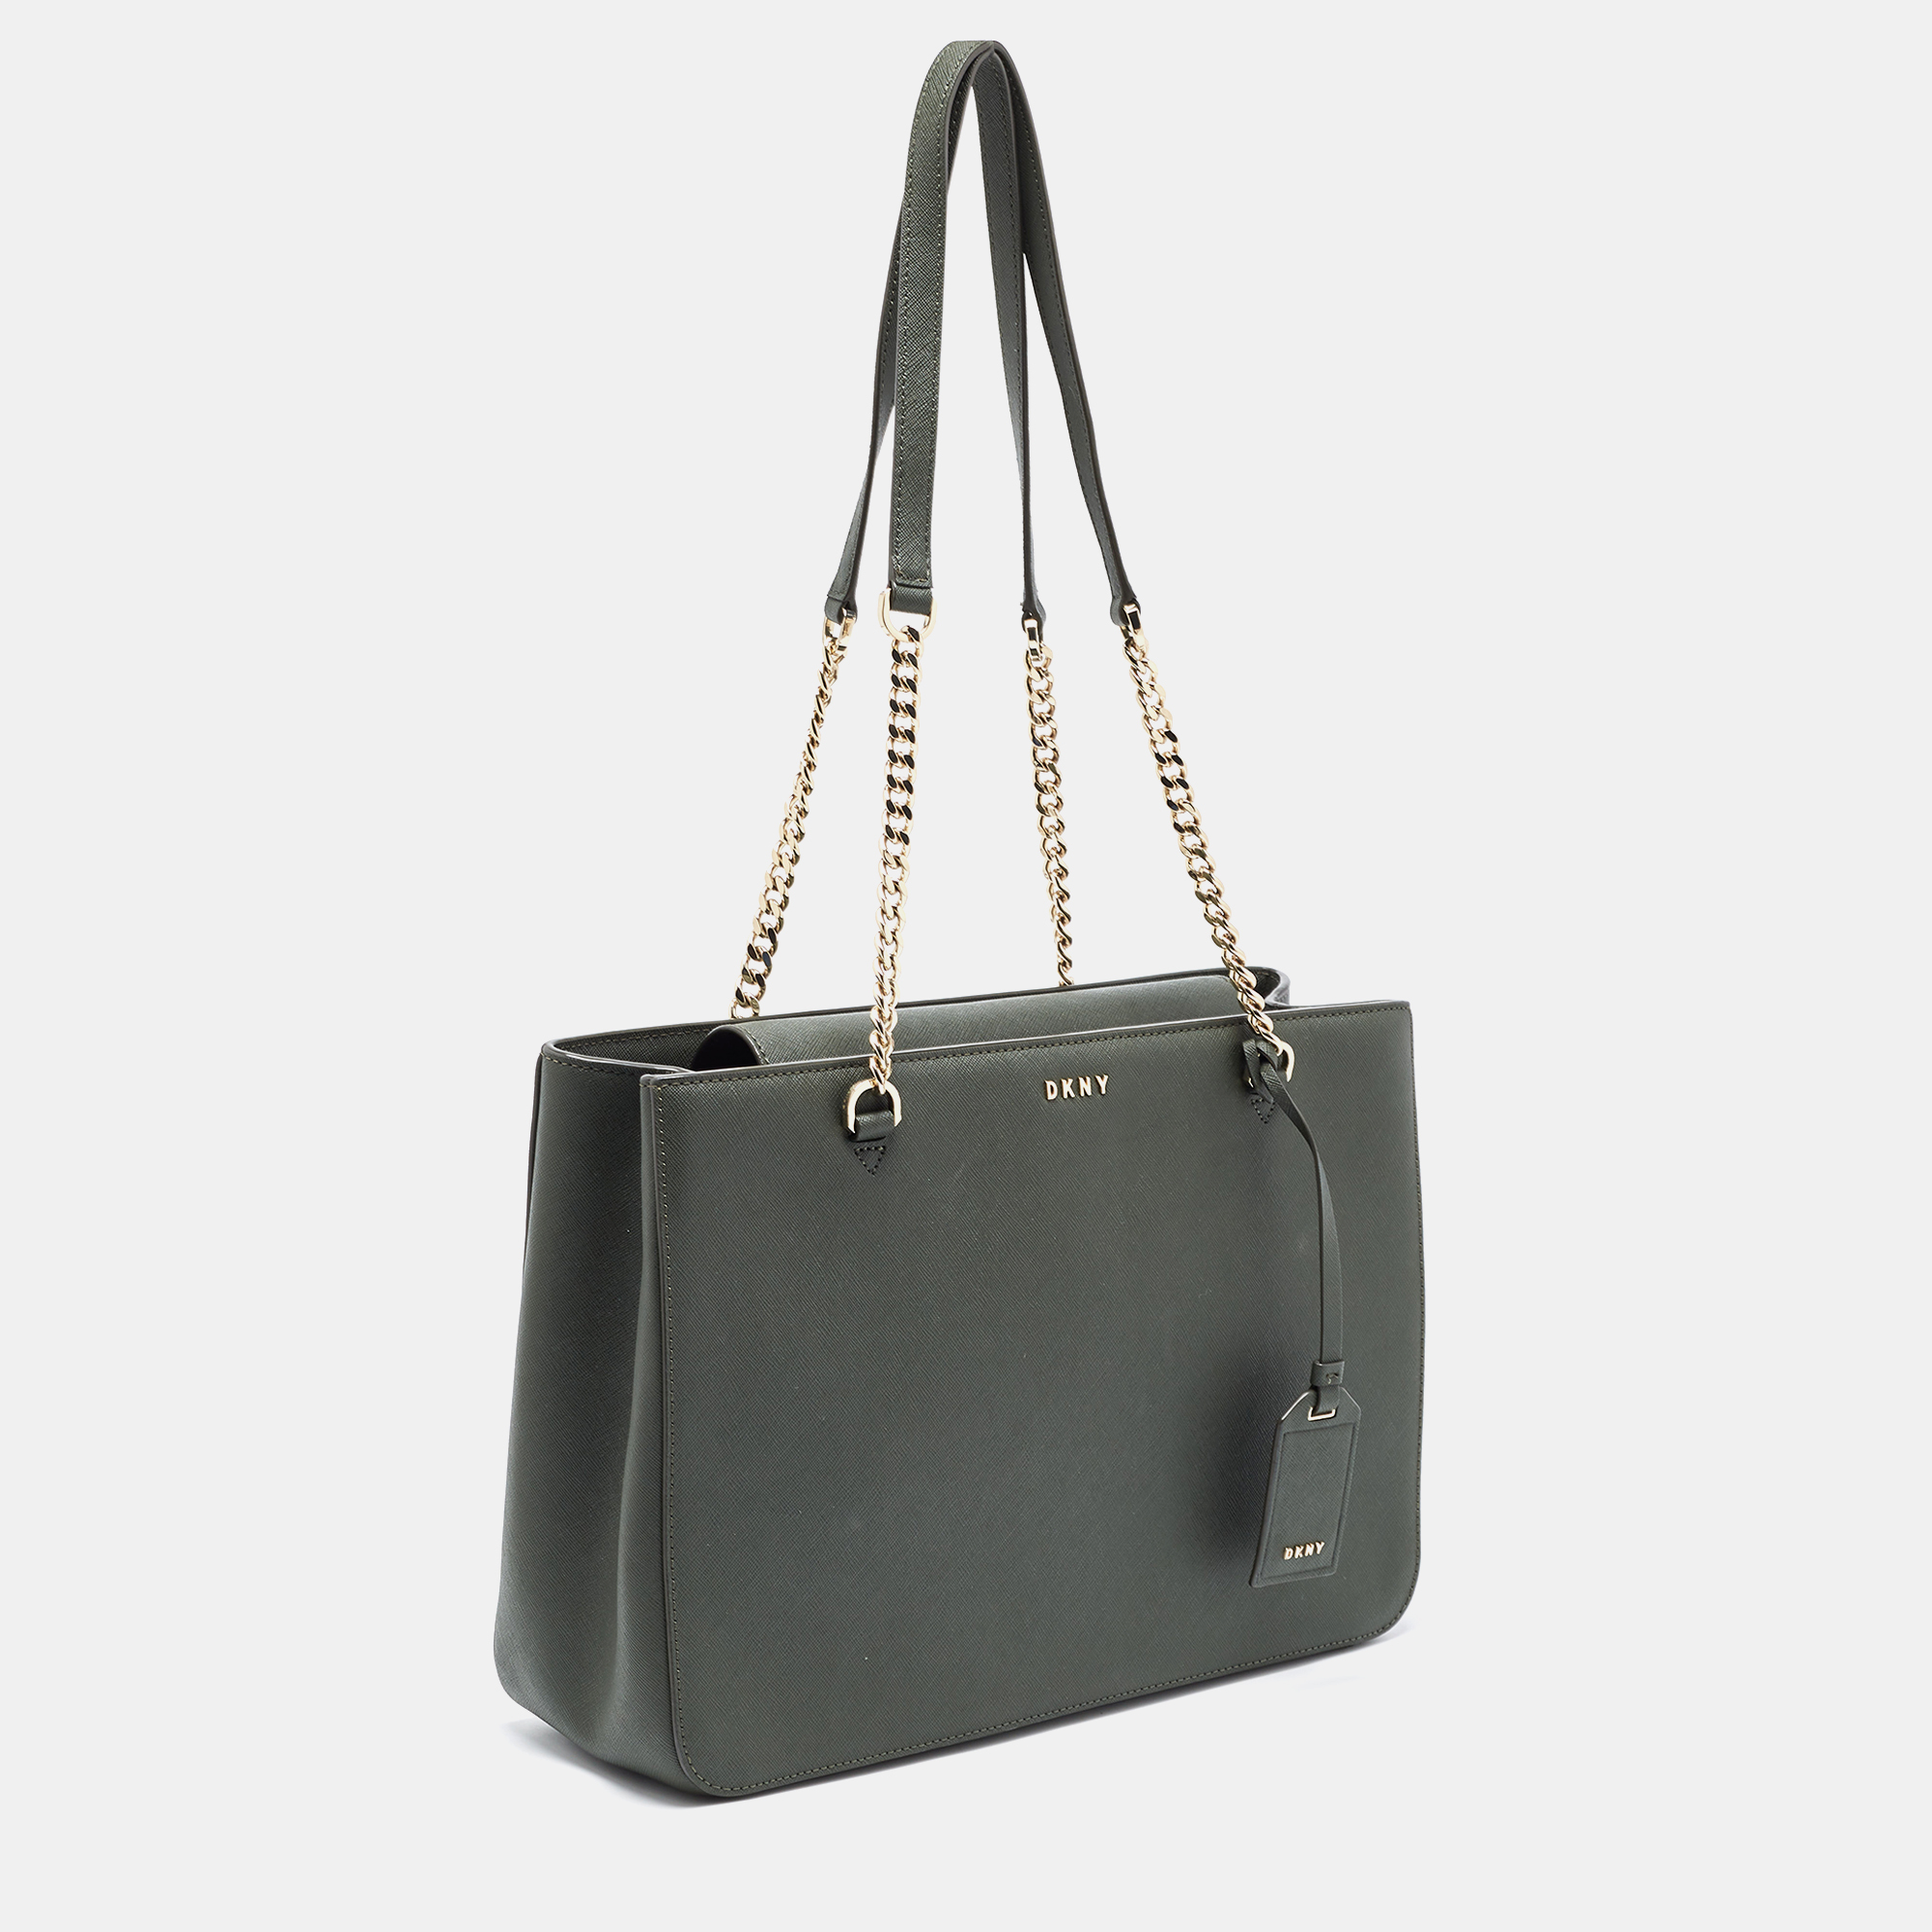 Dkny Green Saffiano Leather Chain Handle Tote